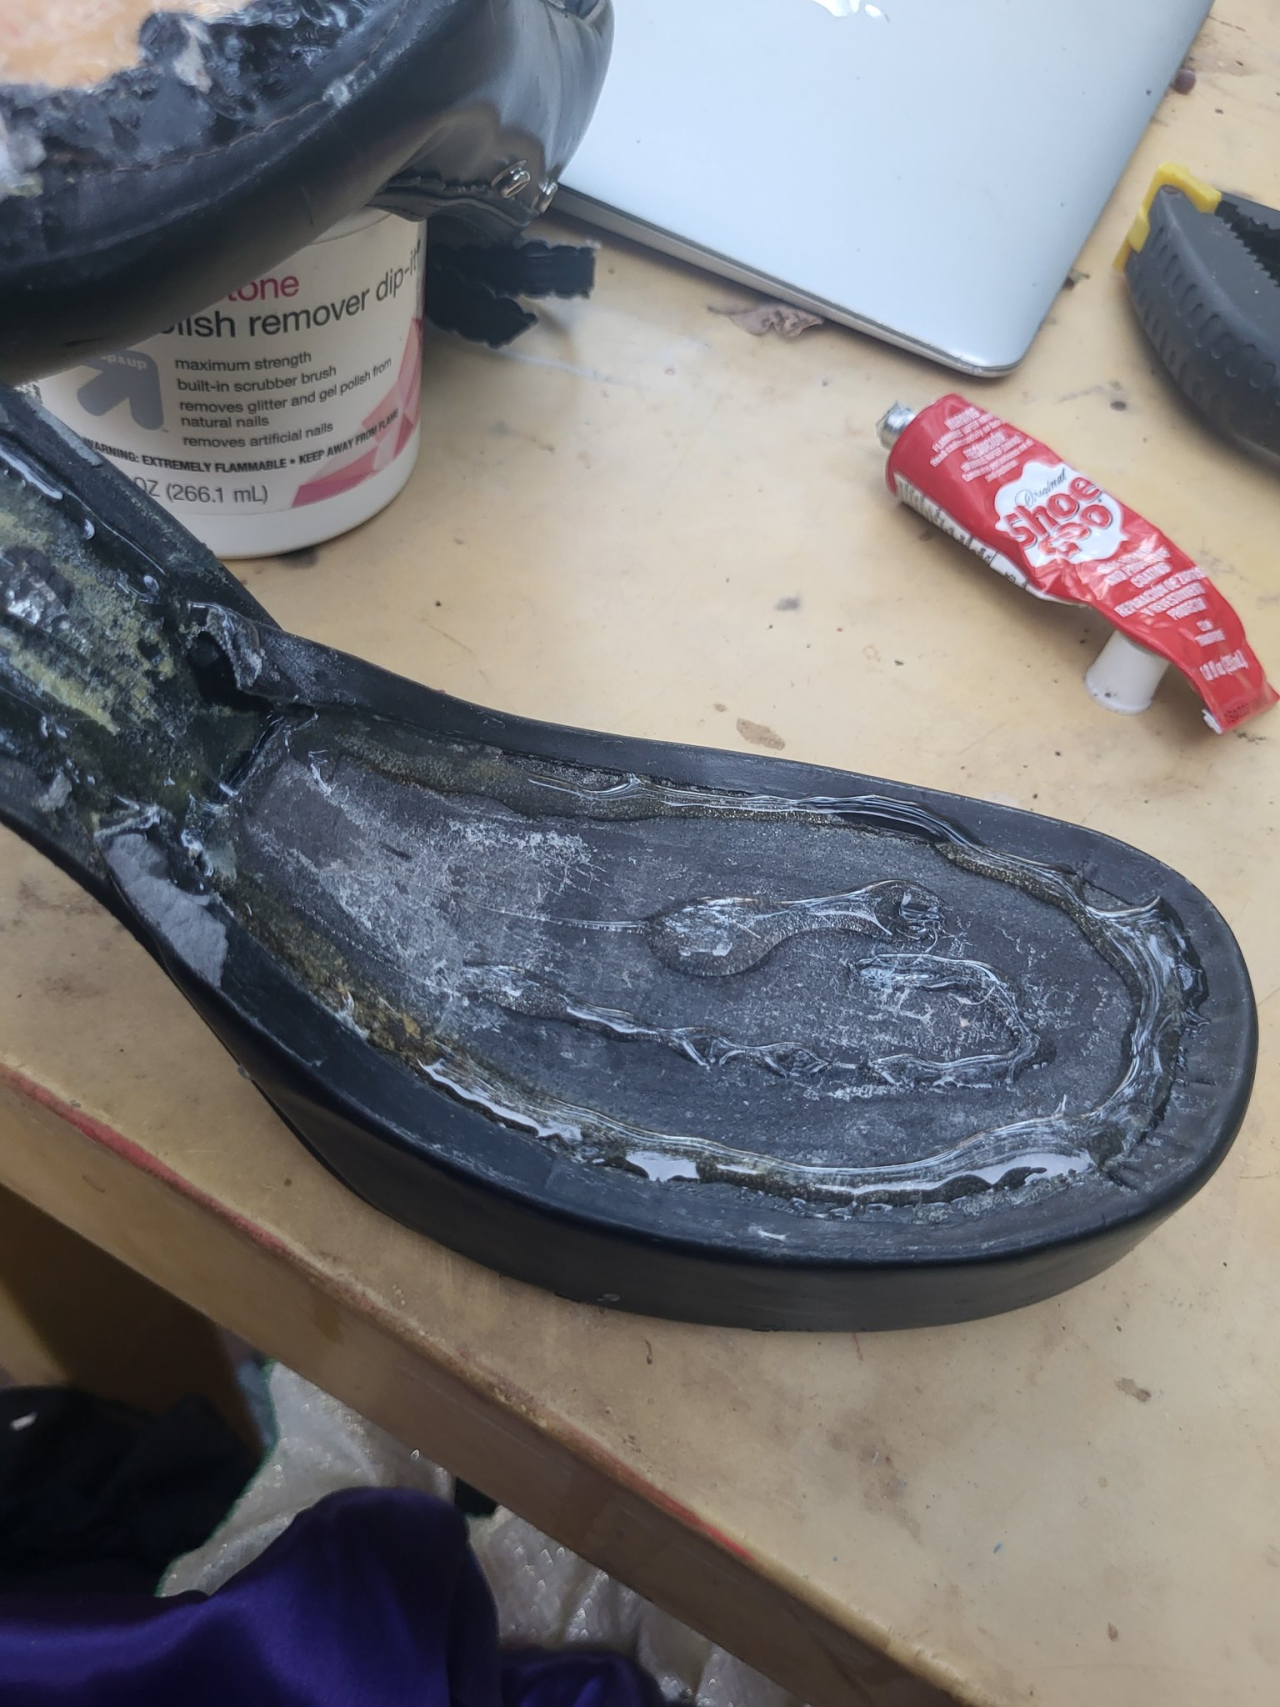 Repairing Soles With Shoe Goo, I don't know what it is abou…